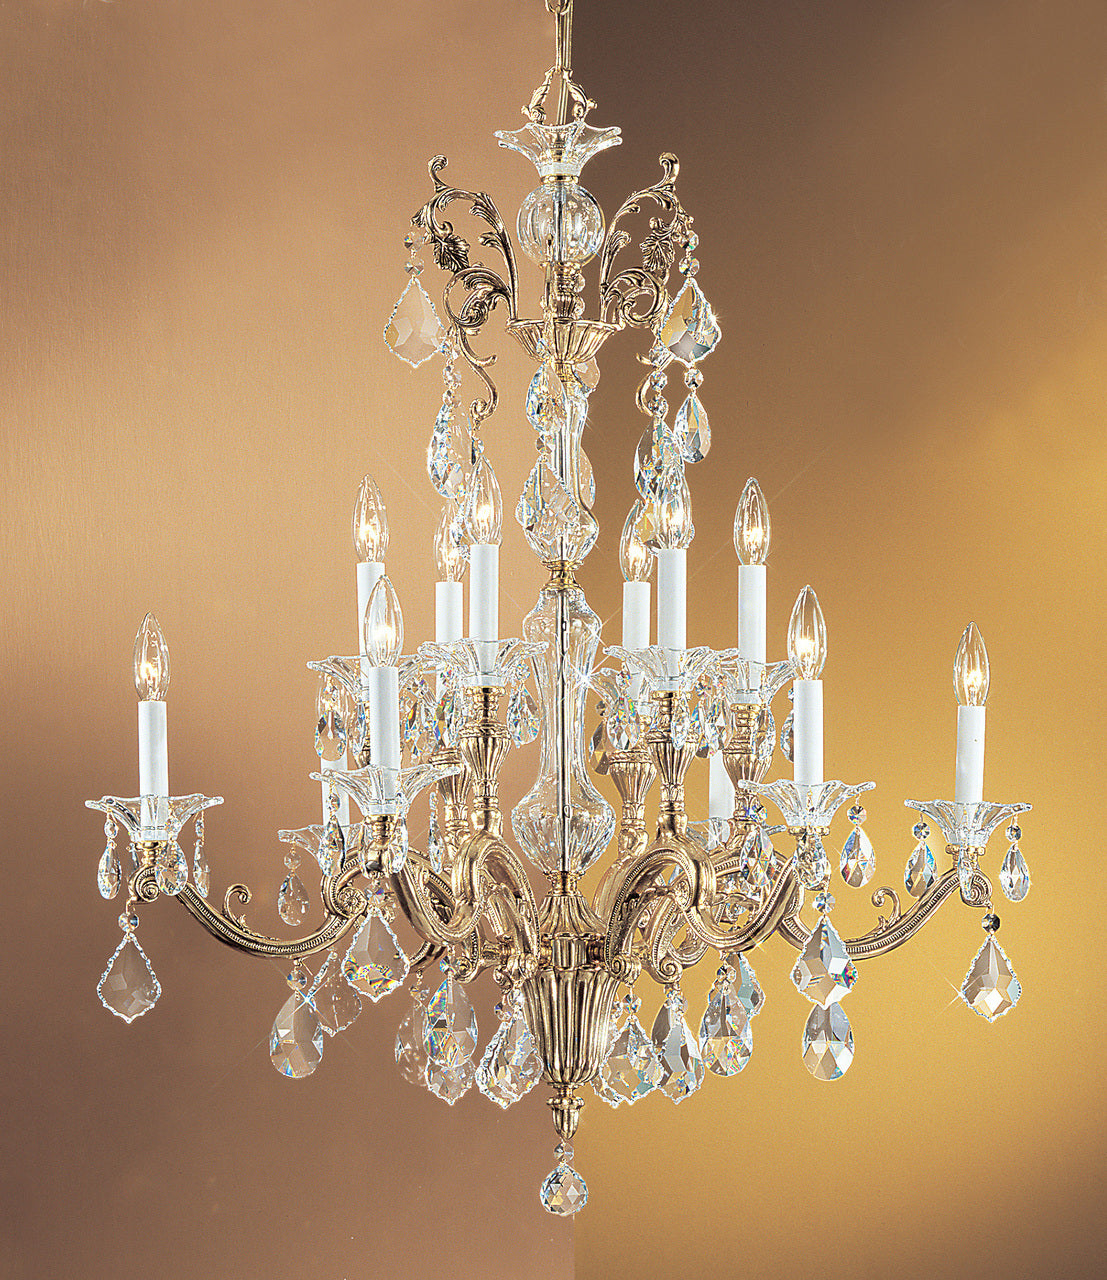 Classic Lighting 57112 BBK SGT Via Firenze Crystal Chandelier in Bronze/Black Patina (Imported from Spain)